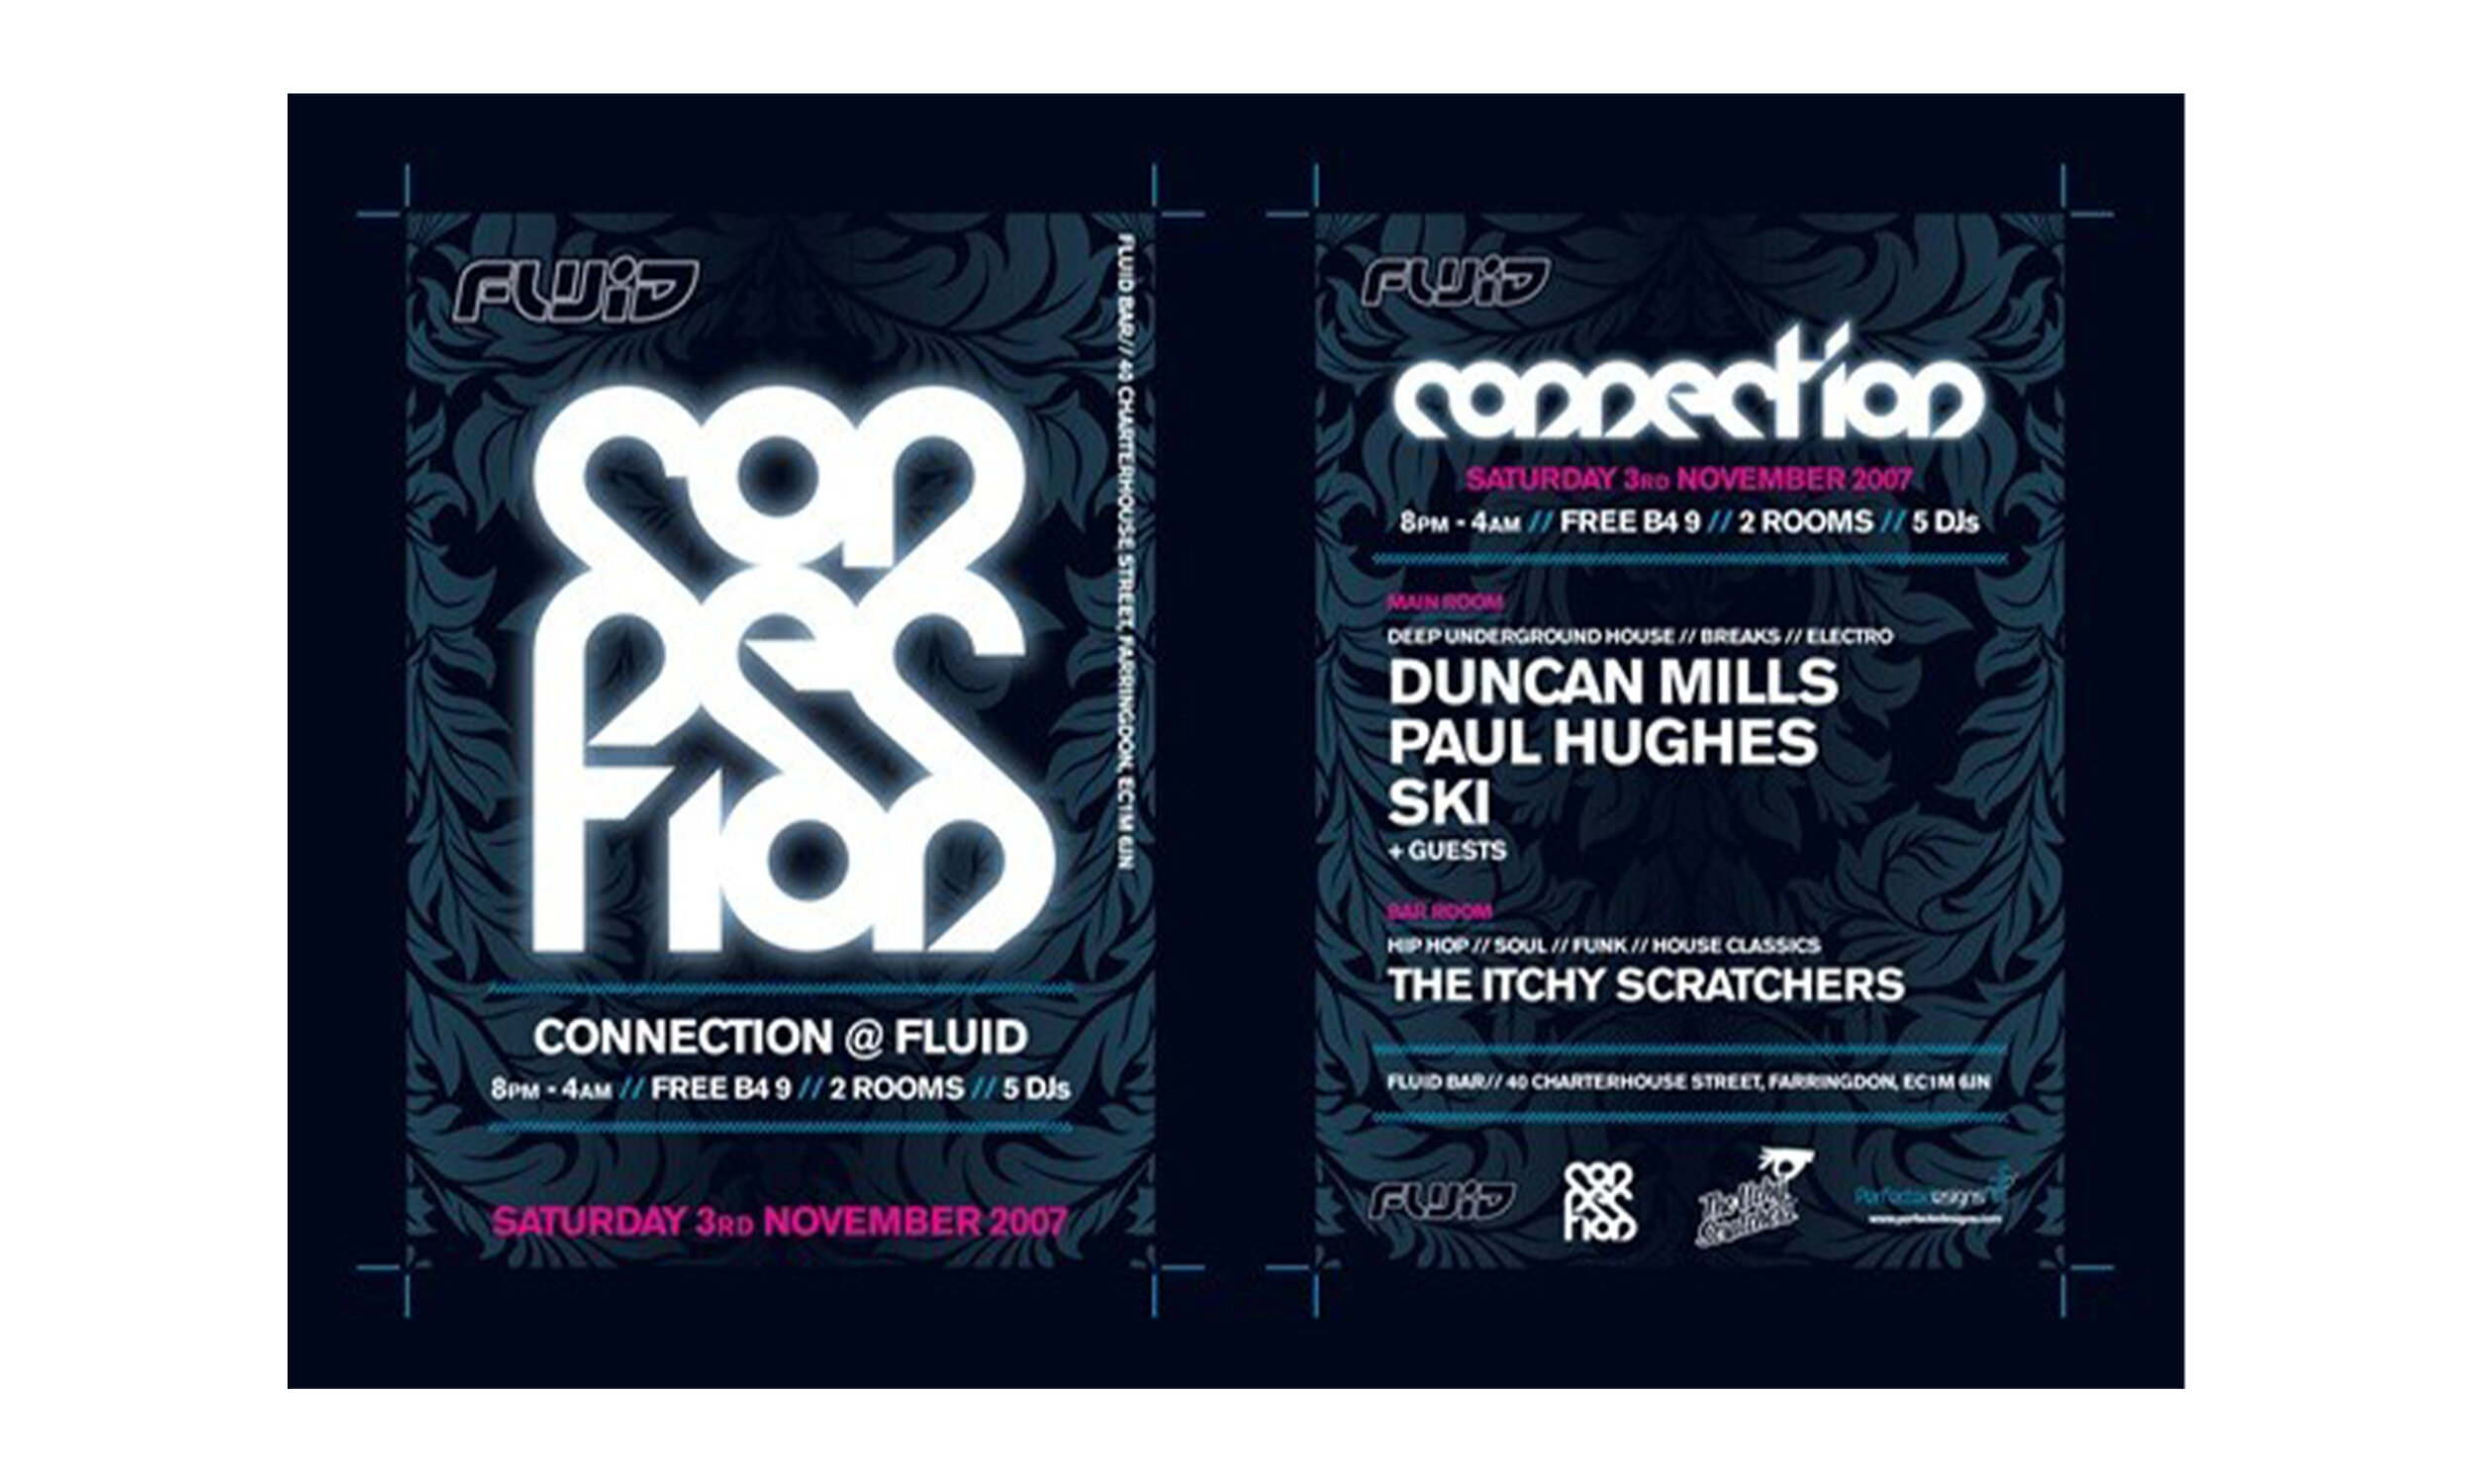 connection.flyer.jpg